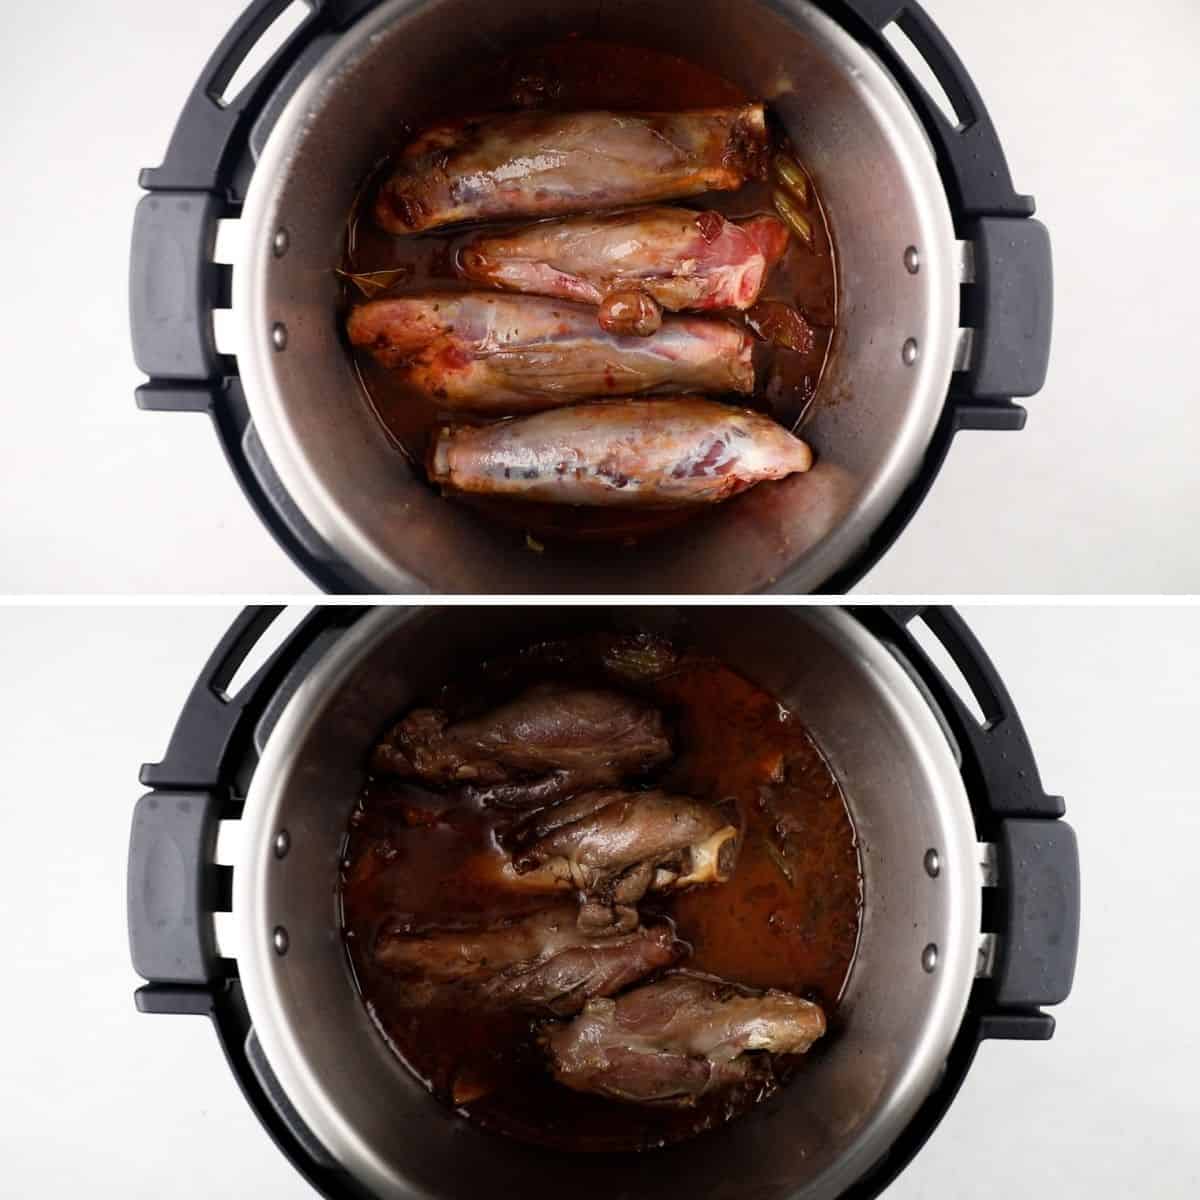 Lamb shanks in a pressure cooker before and after cooking.